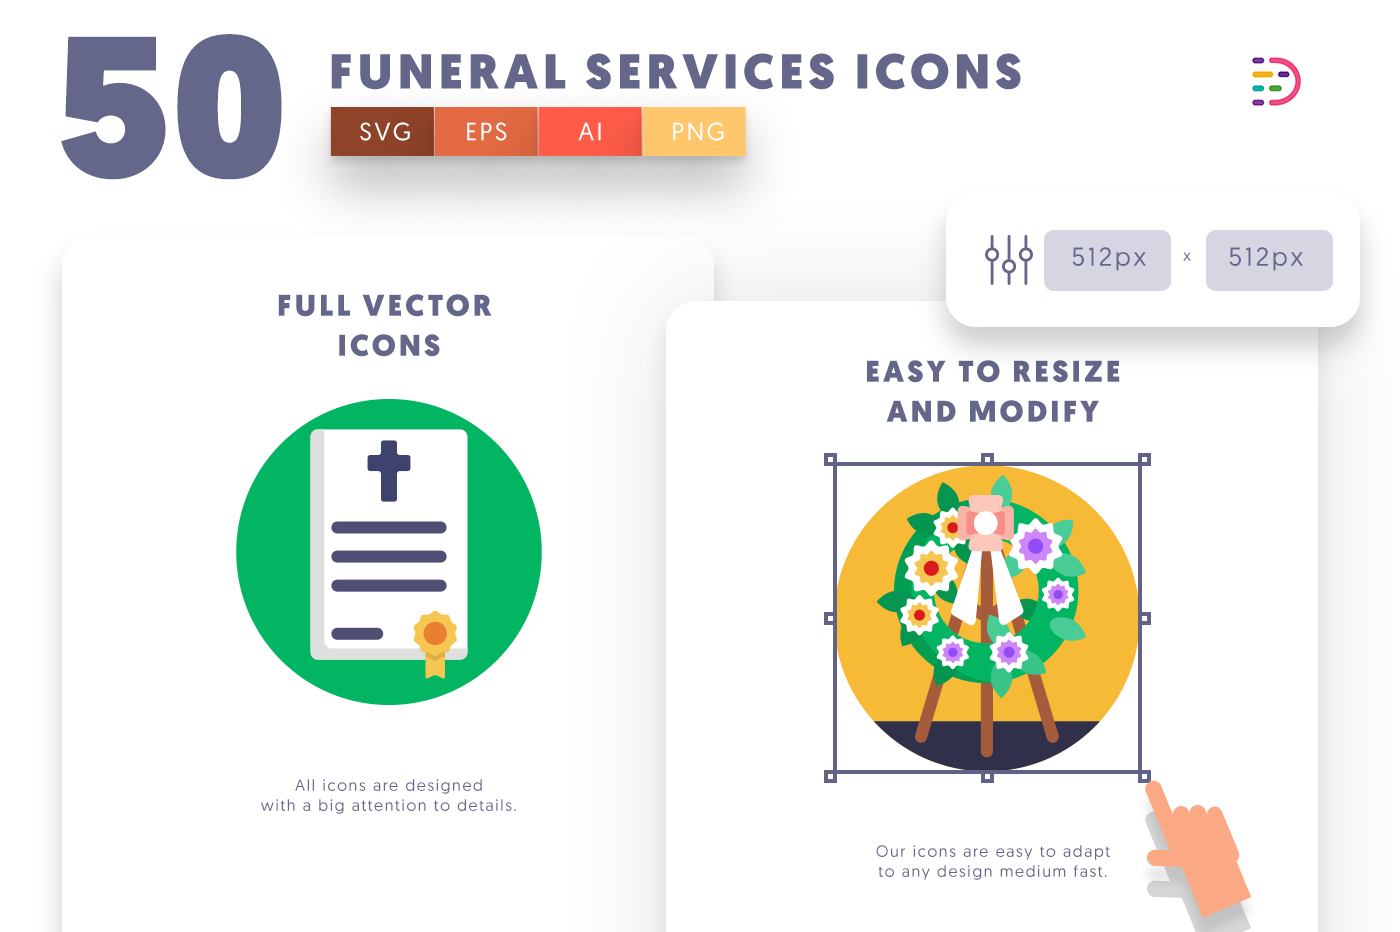 Full vector 50 Funeral Services Icons